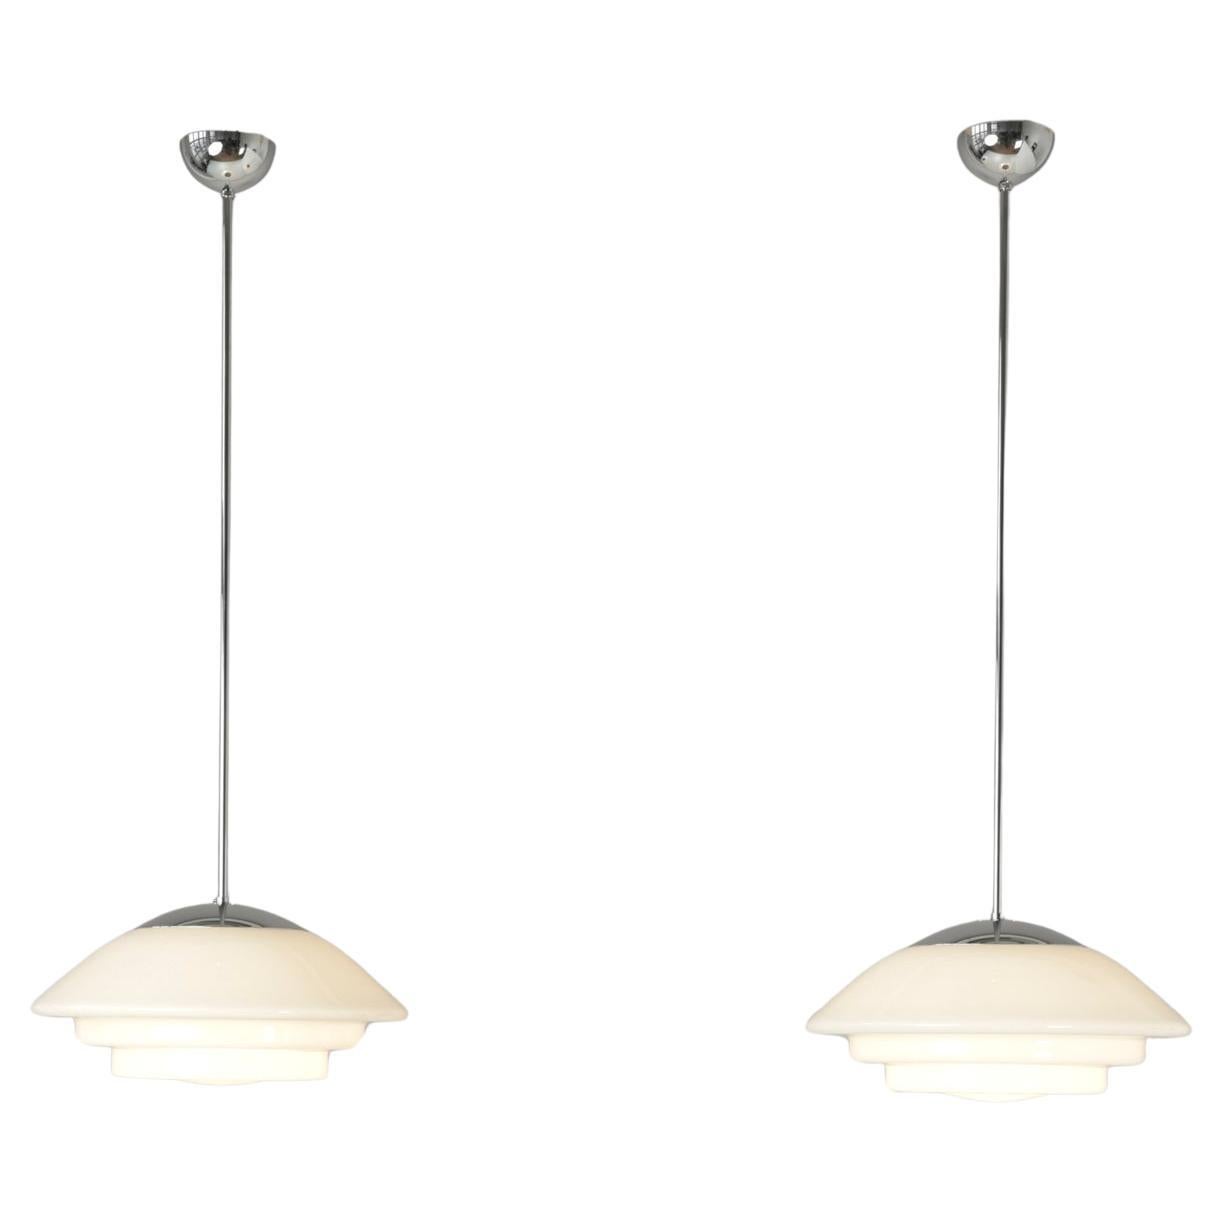 Pair of Pendant Lamps in Milk Glass, Germany - 1935 For Sale